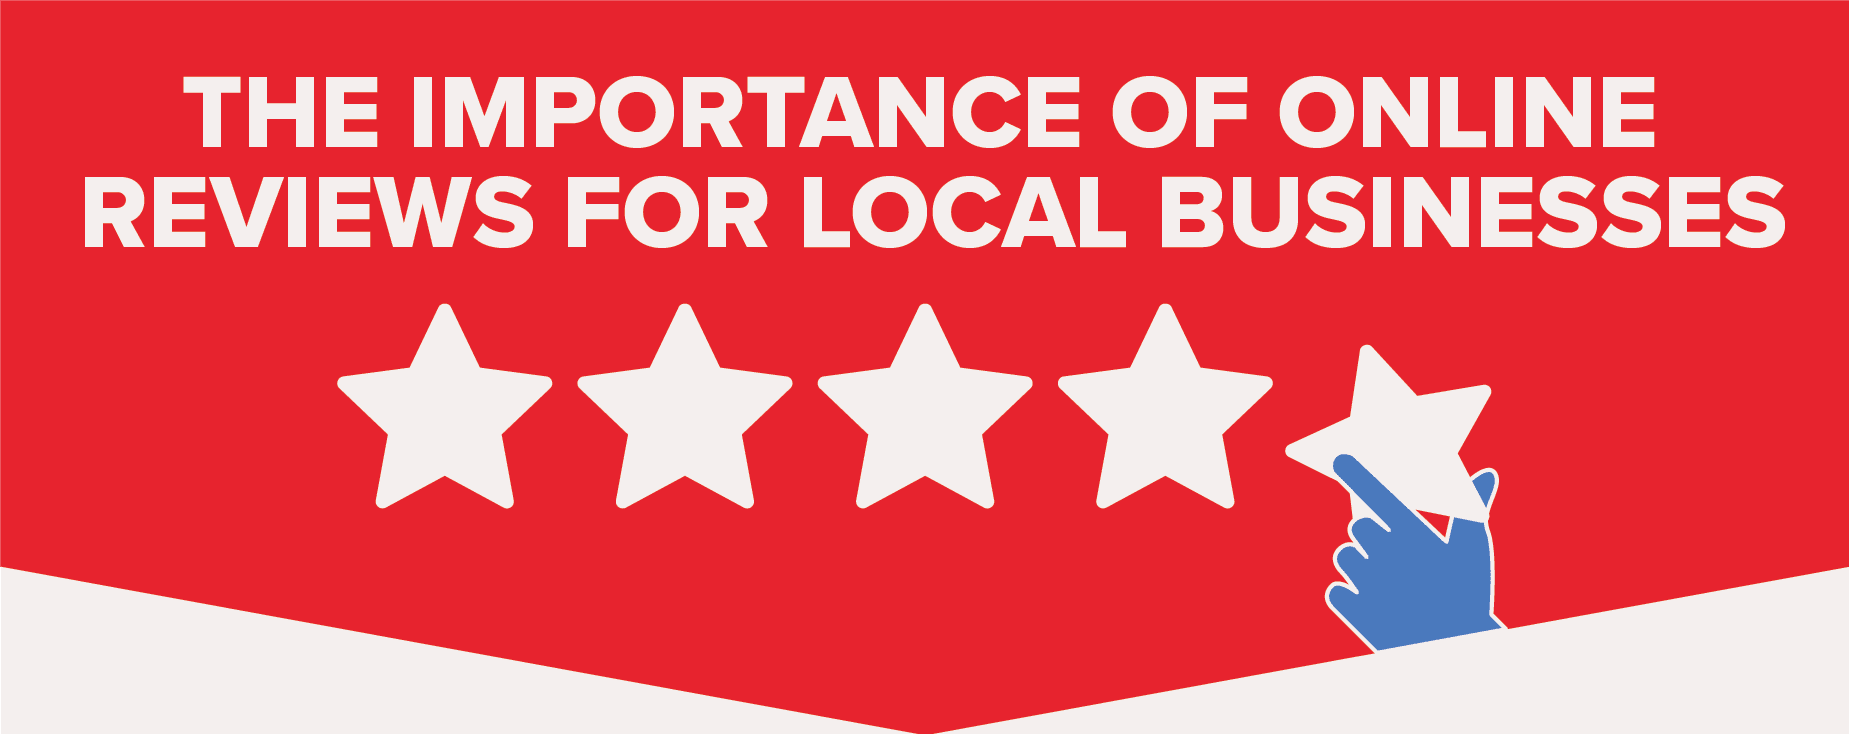 The Importance of Online Reviews for Local Businesses